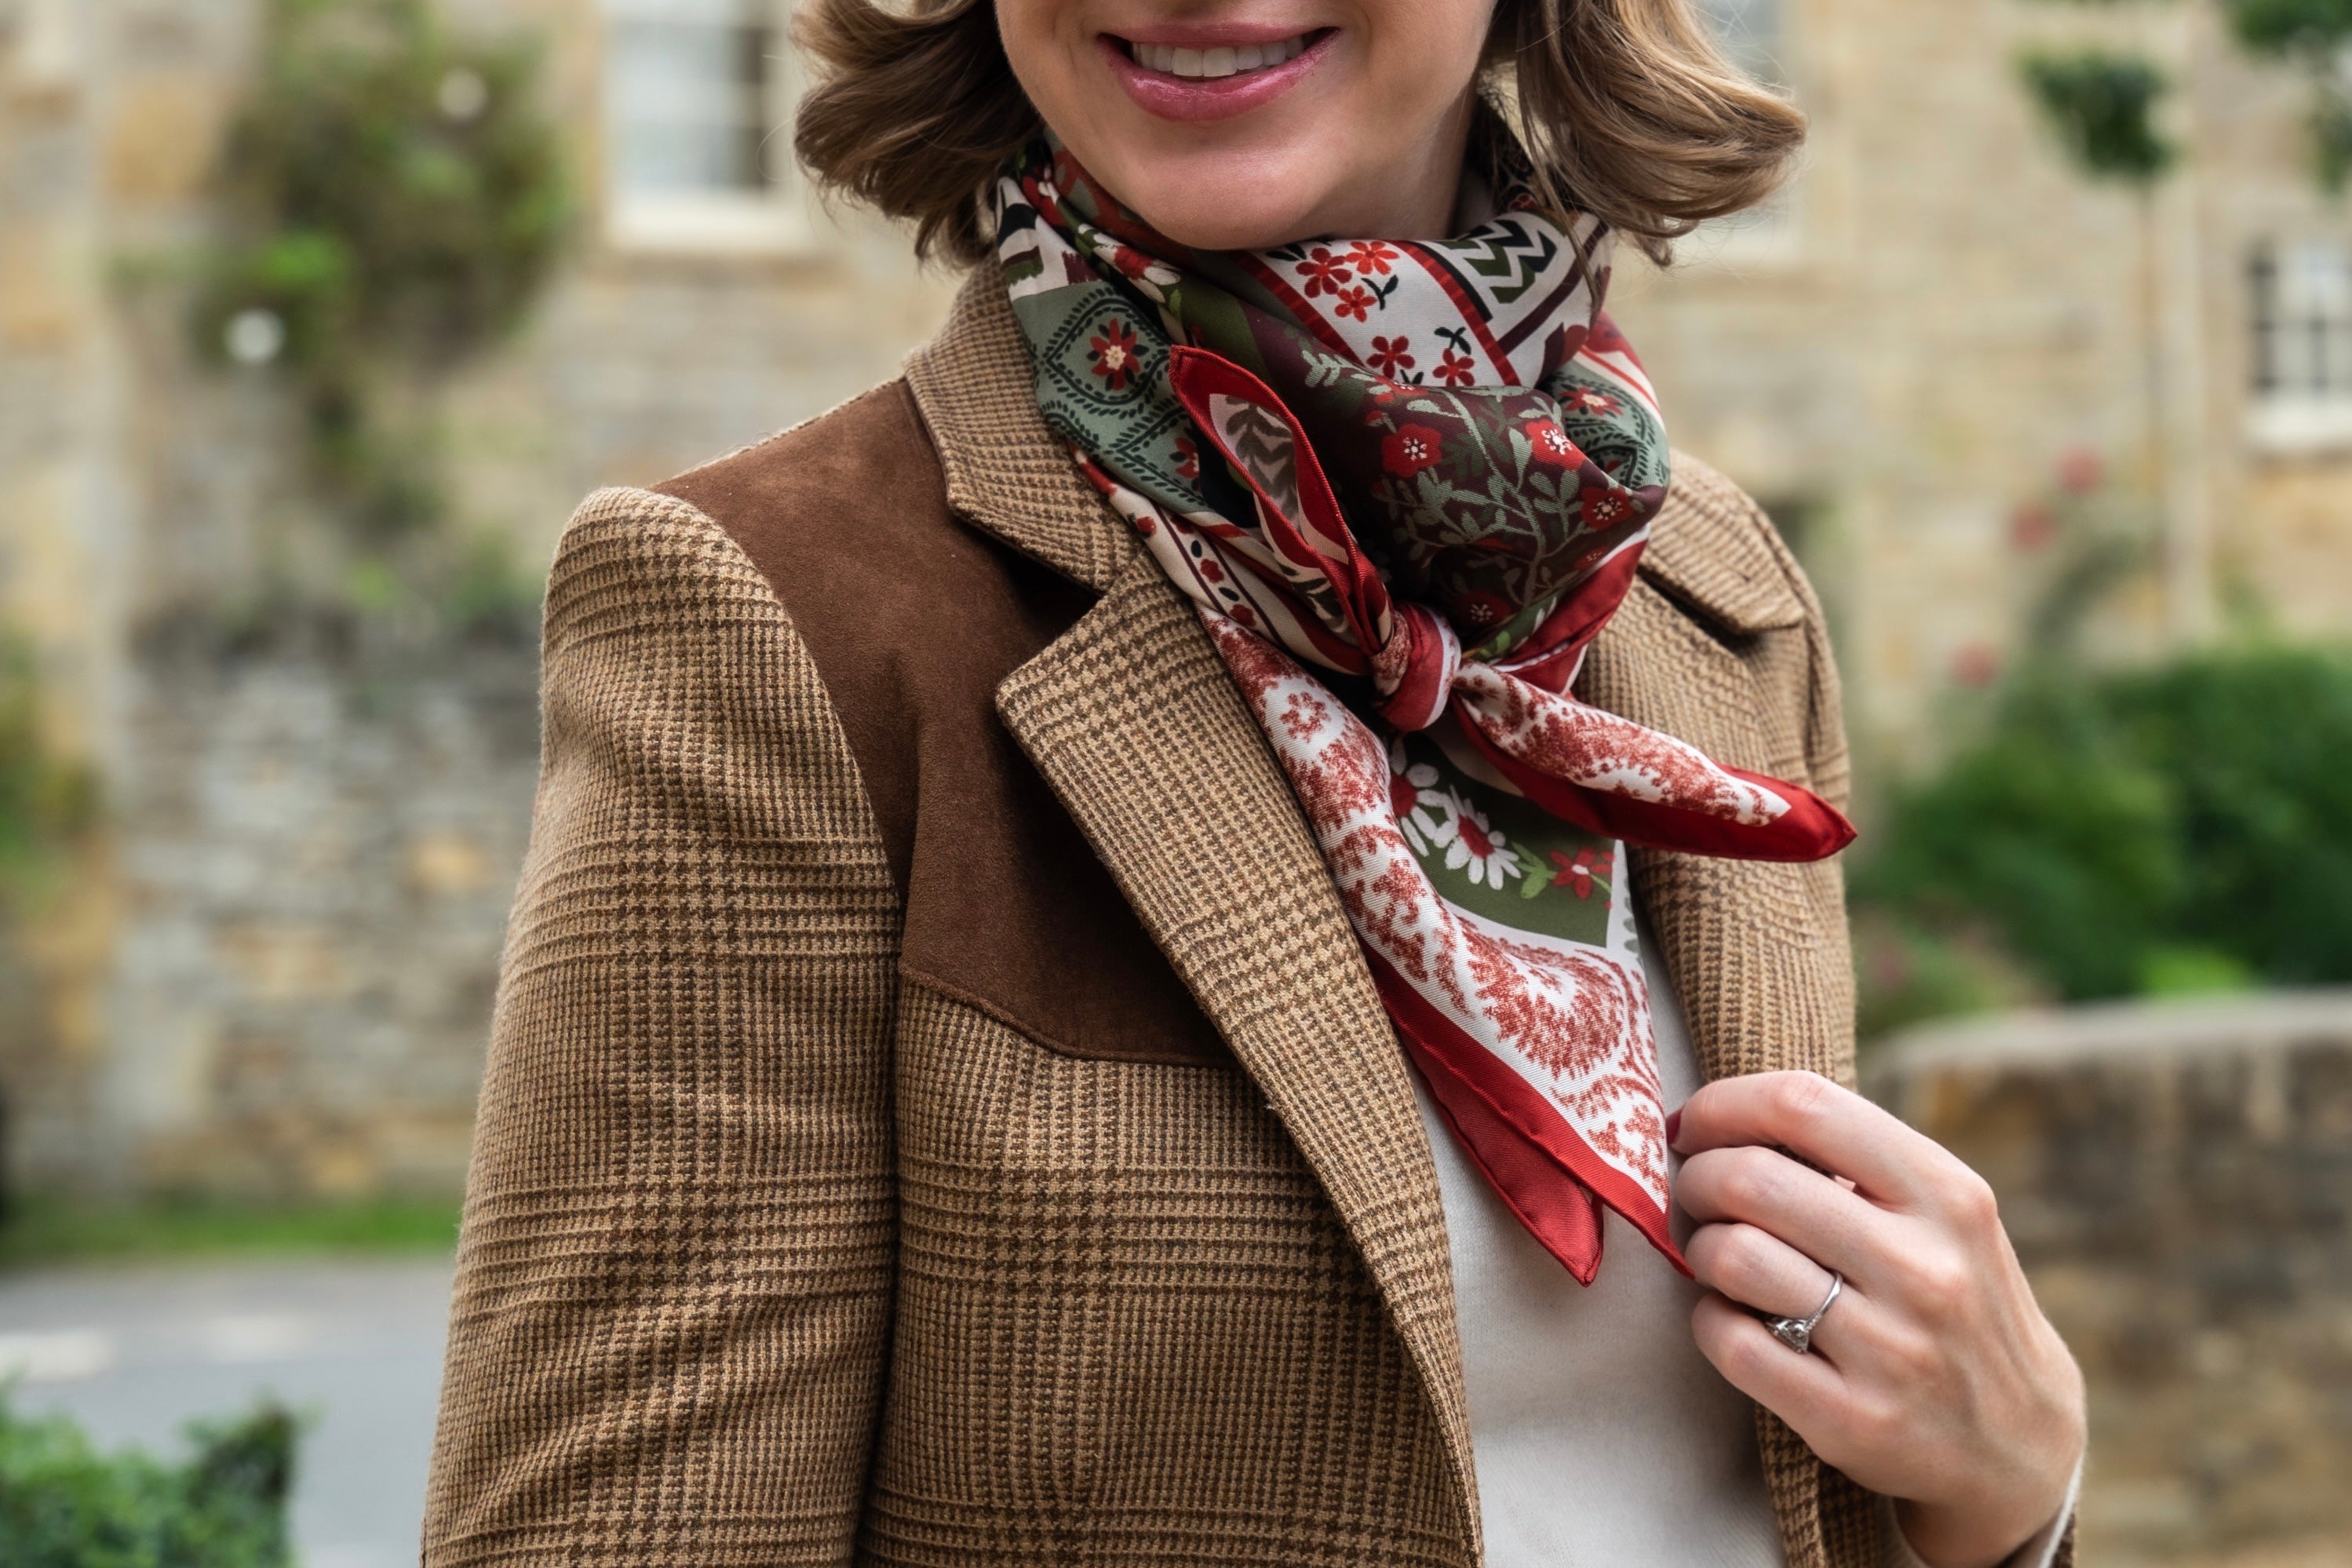 Stacie Flinner for Fleur Sauvage in the Cotswolds